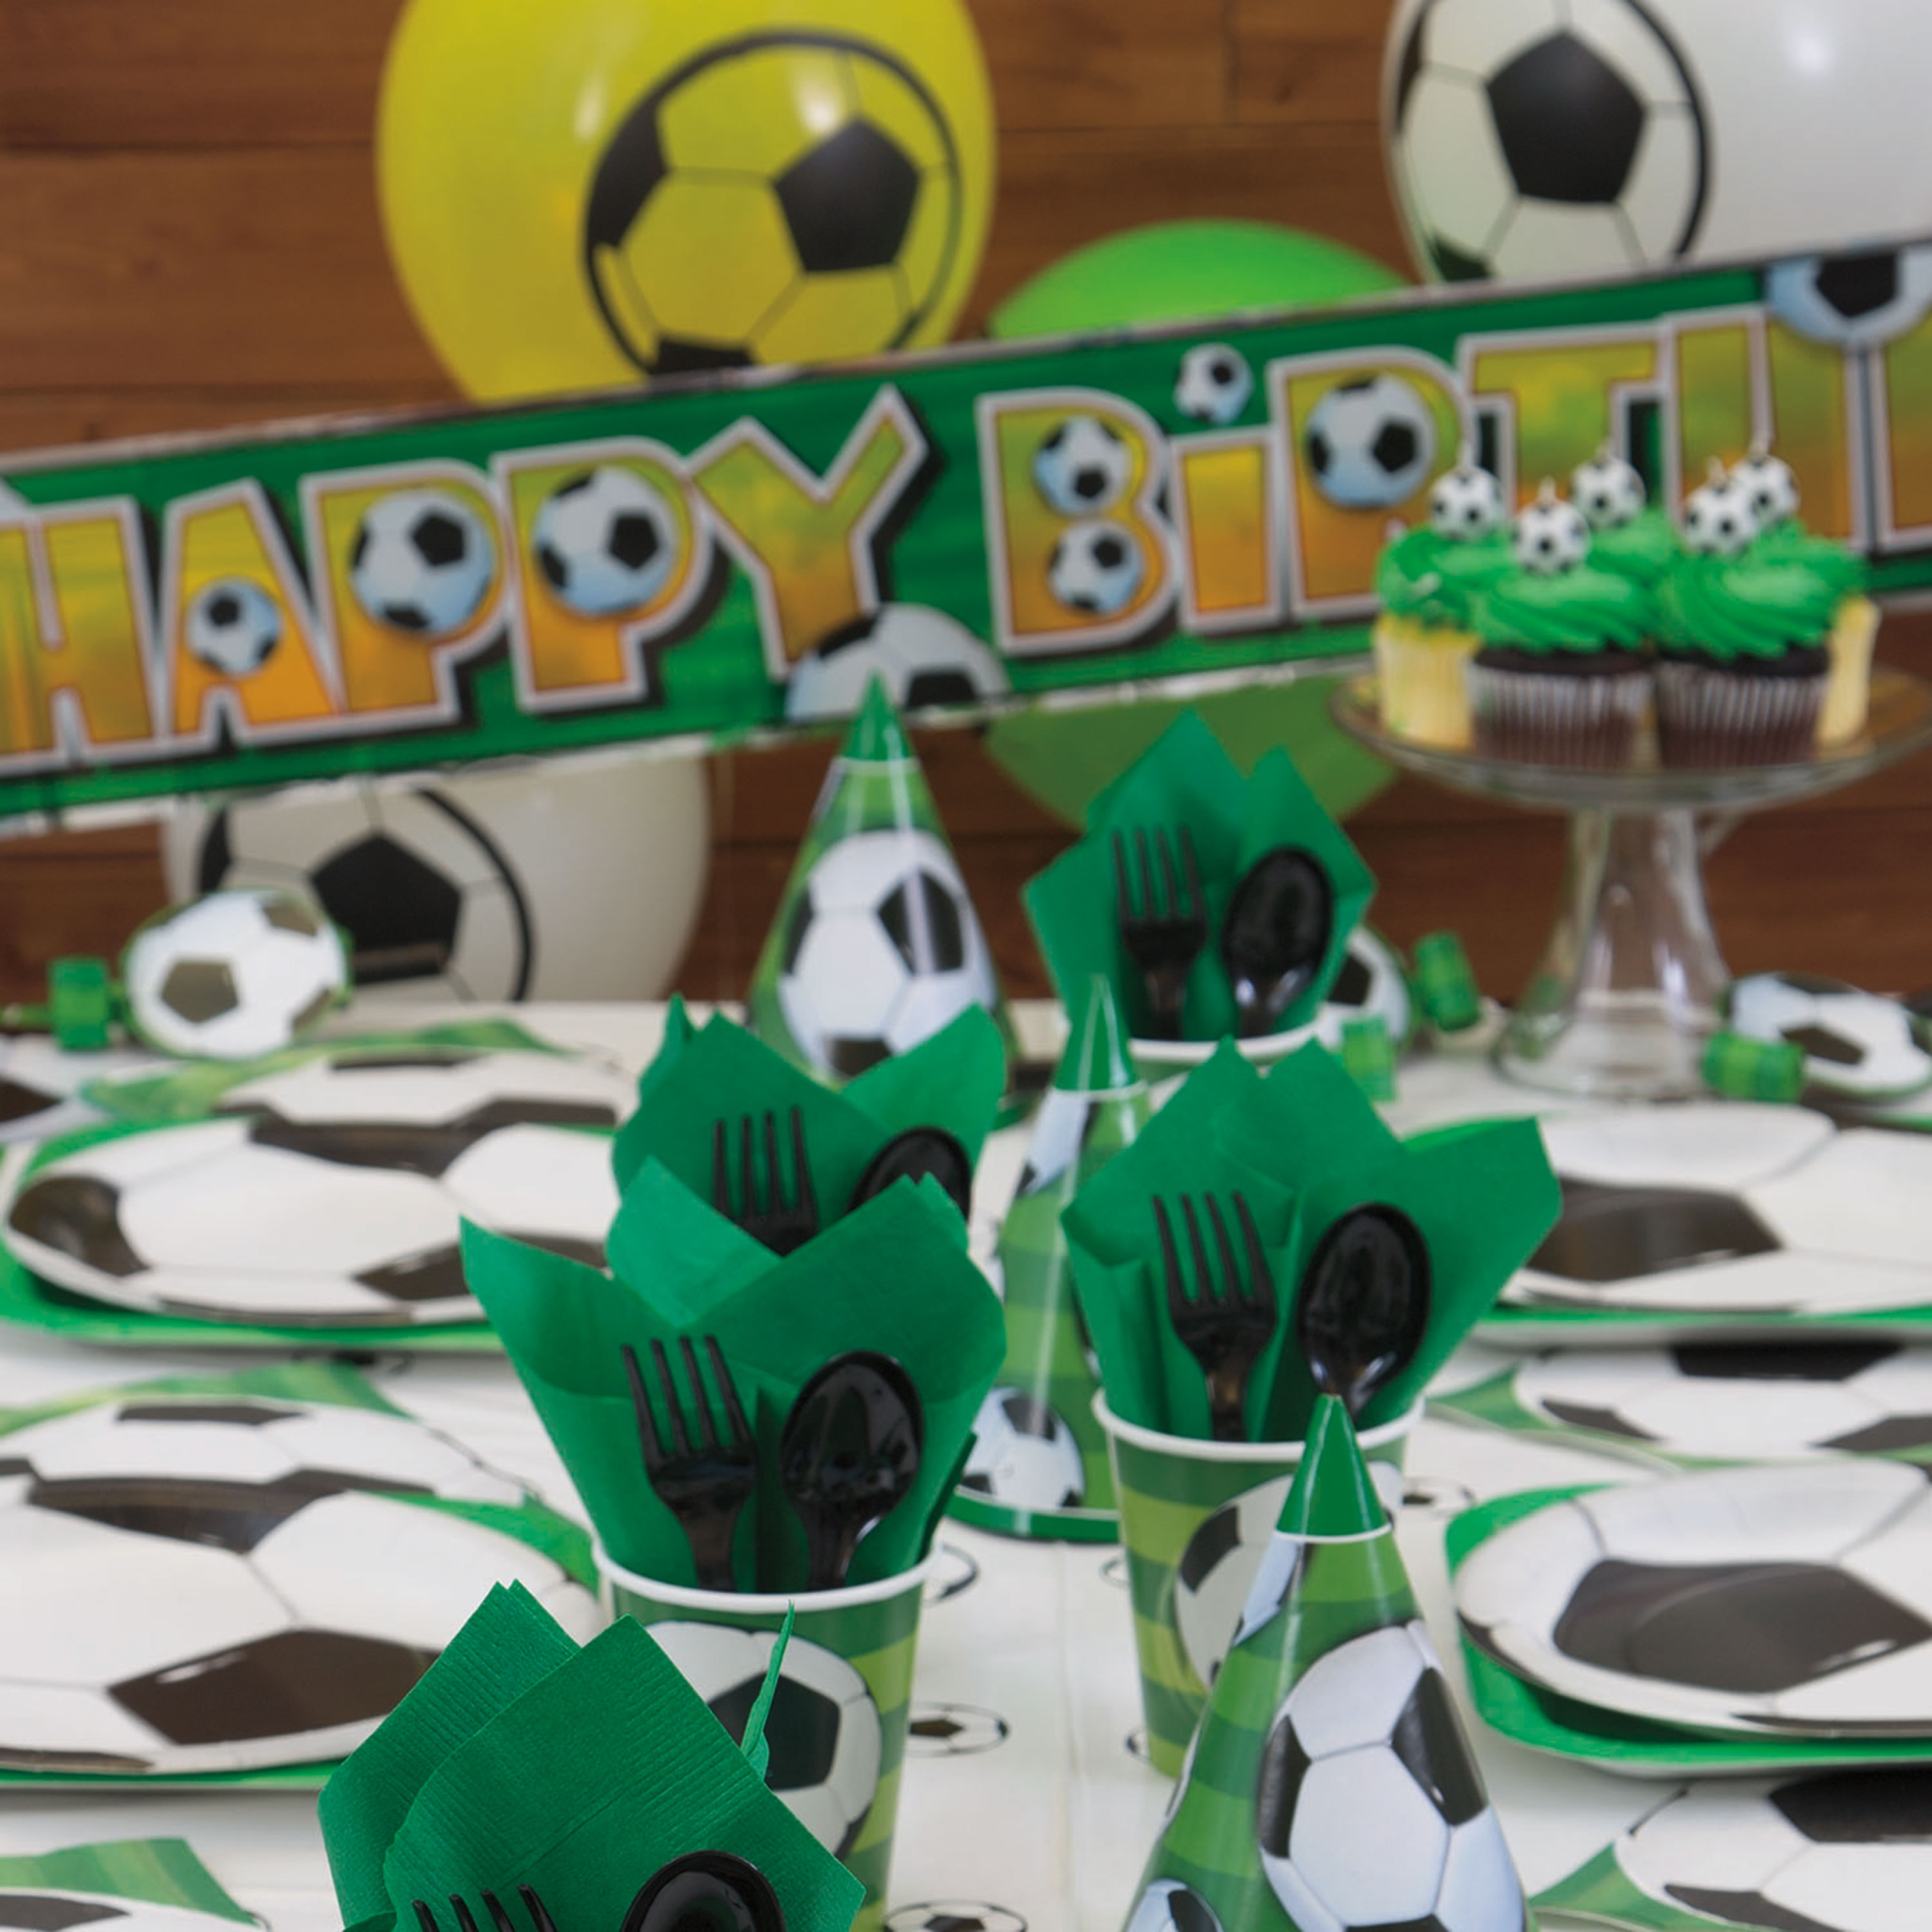 Soccer Plastic Party Tablecloth, 84" x 54" - image 3 of 4